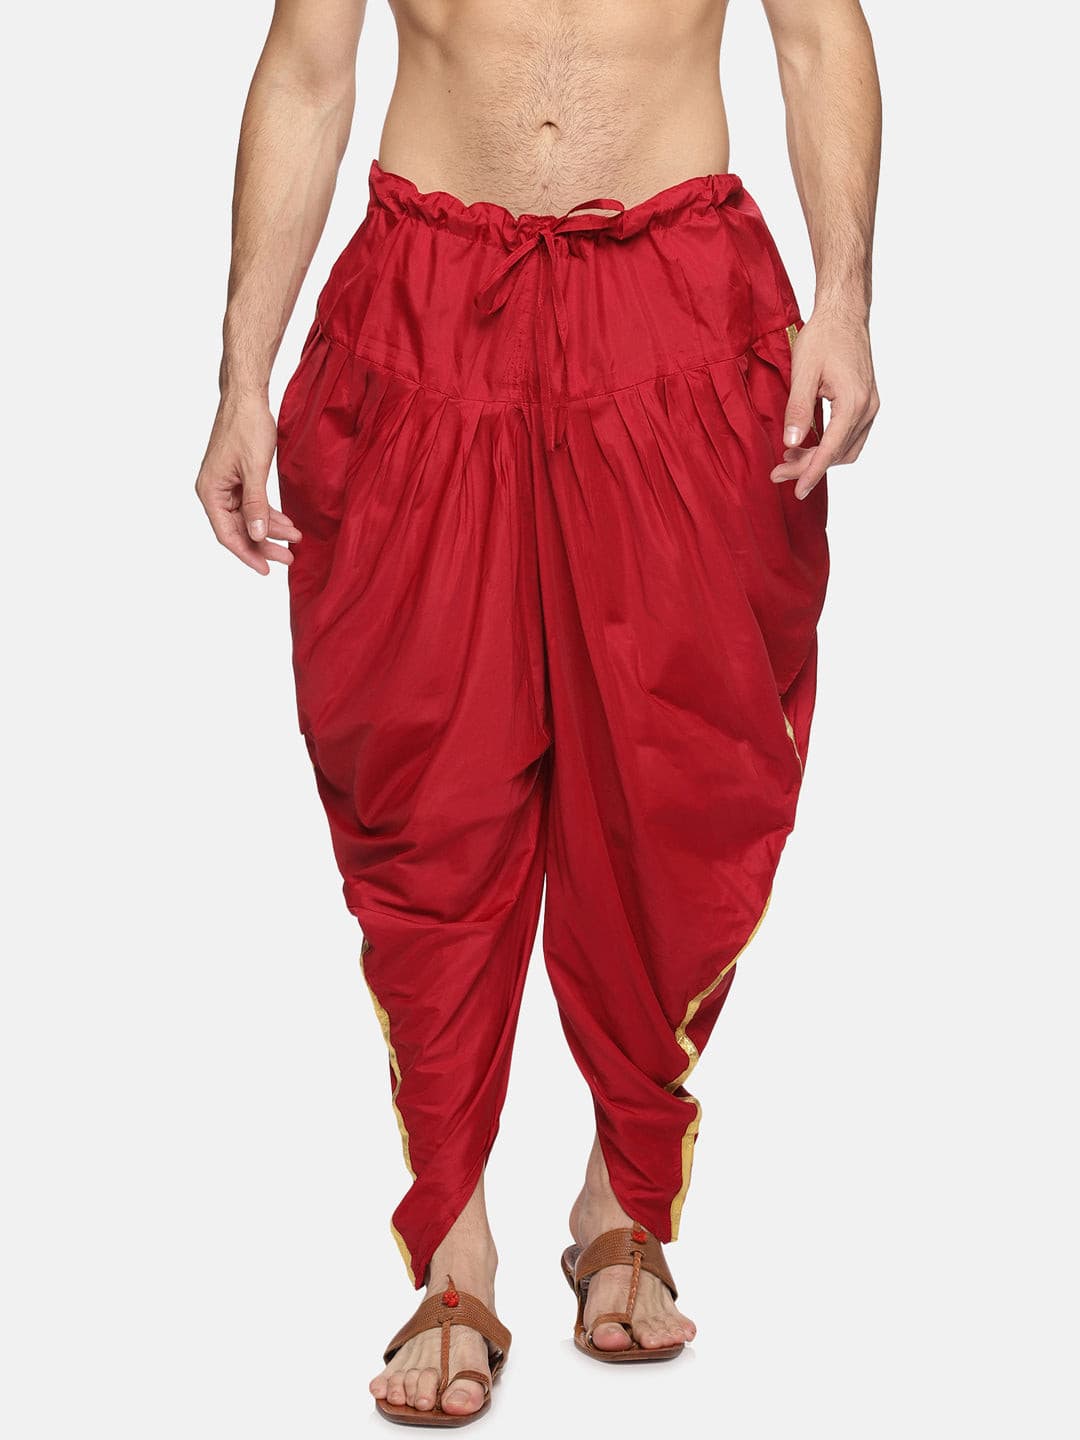 Cut Style Clothing Printed Rayon Women Harem Pants  Buy Cut Style Clothing  Printed Rayon Women Harem Pants Online at Best Prices in India   Flipkartcom